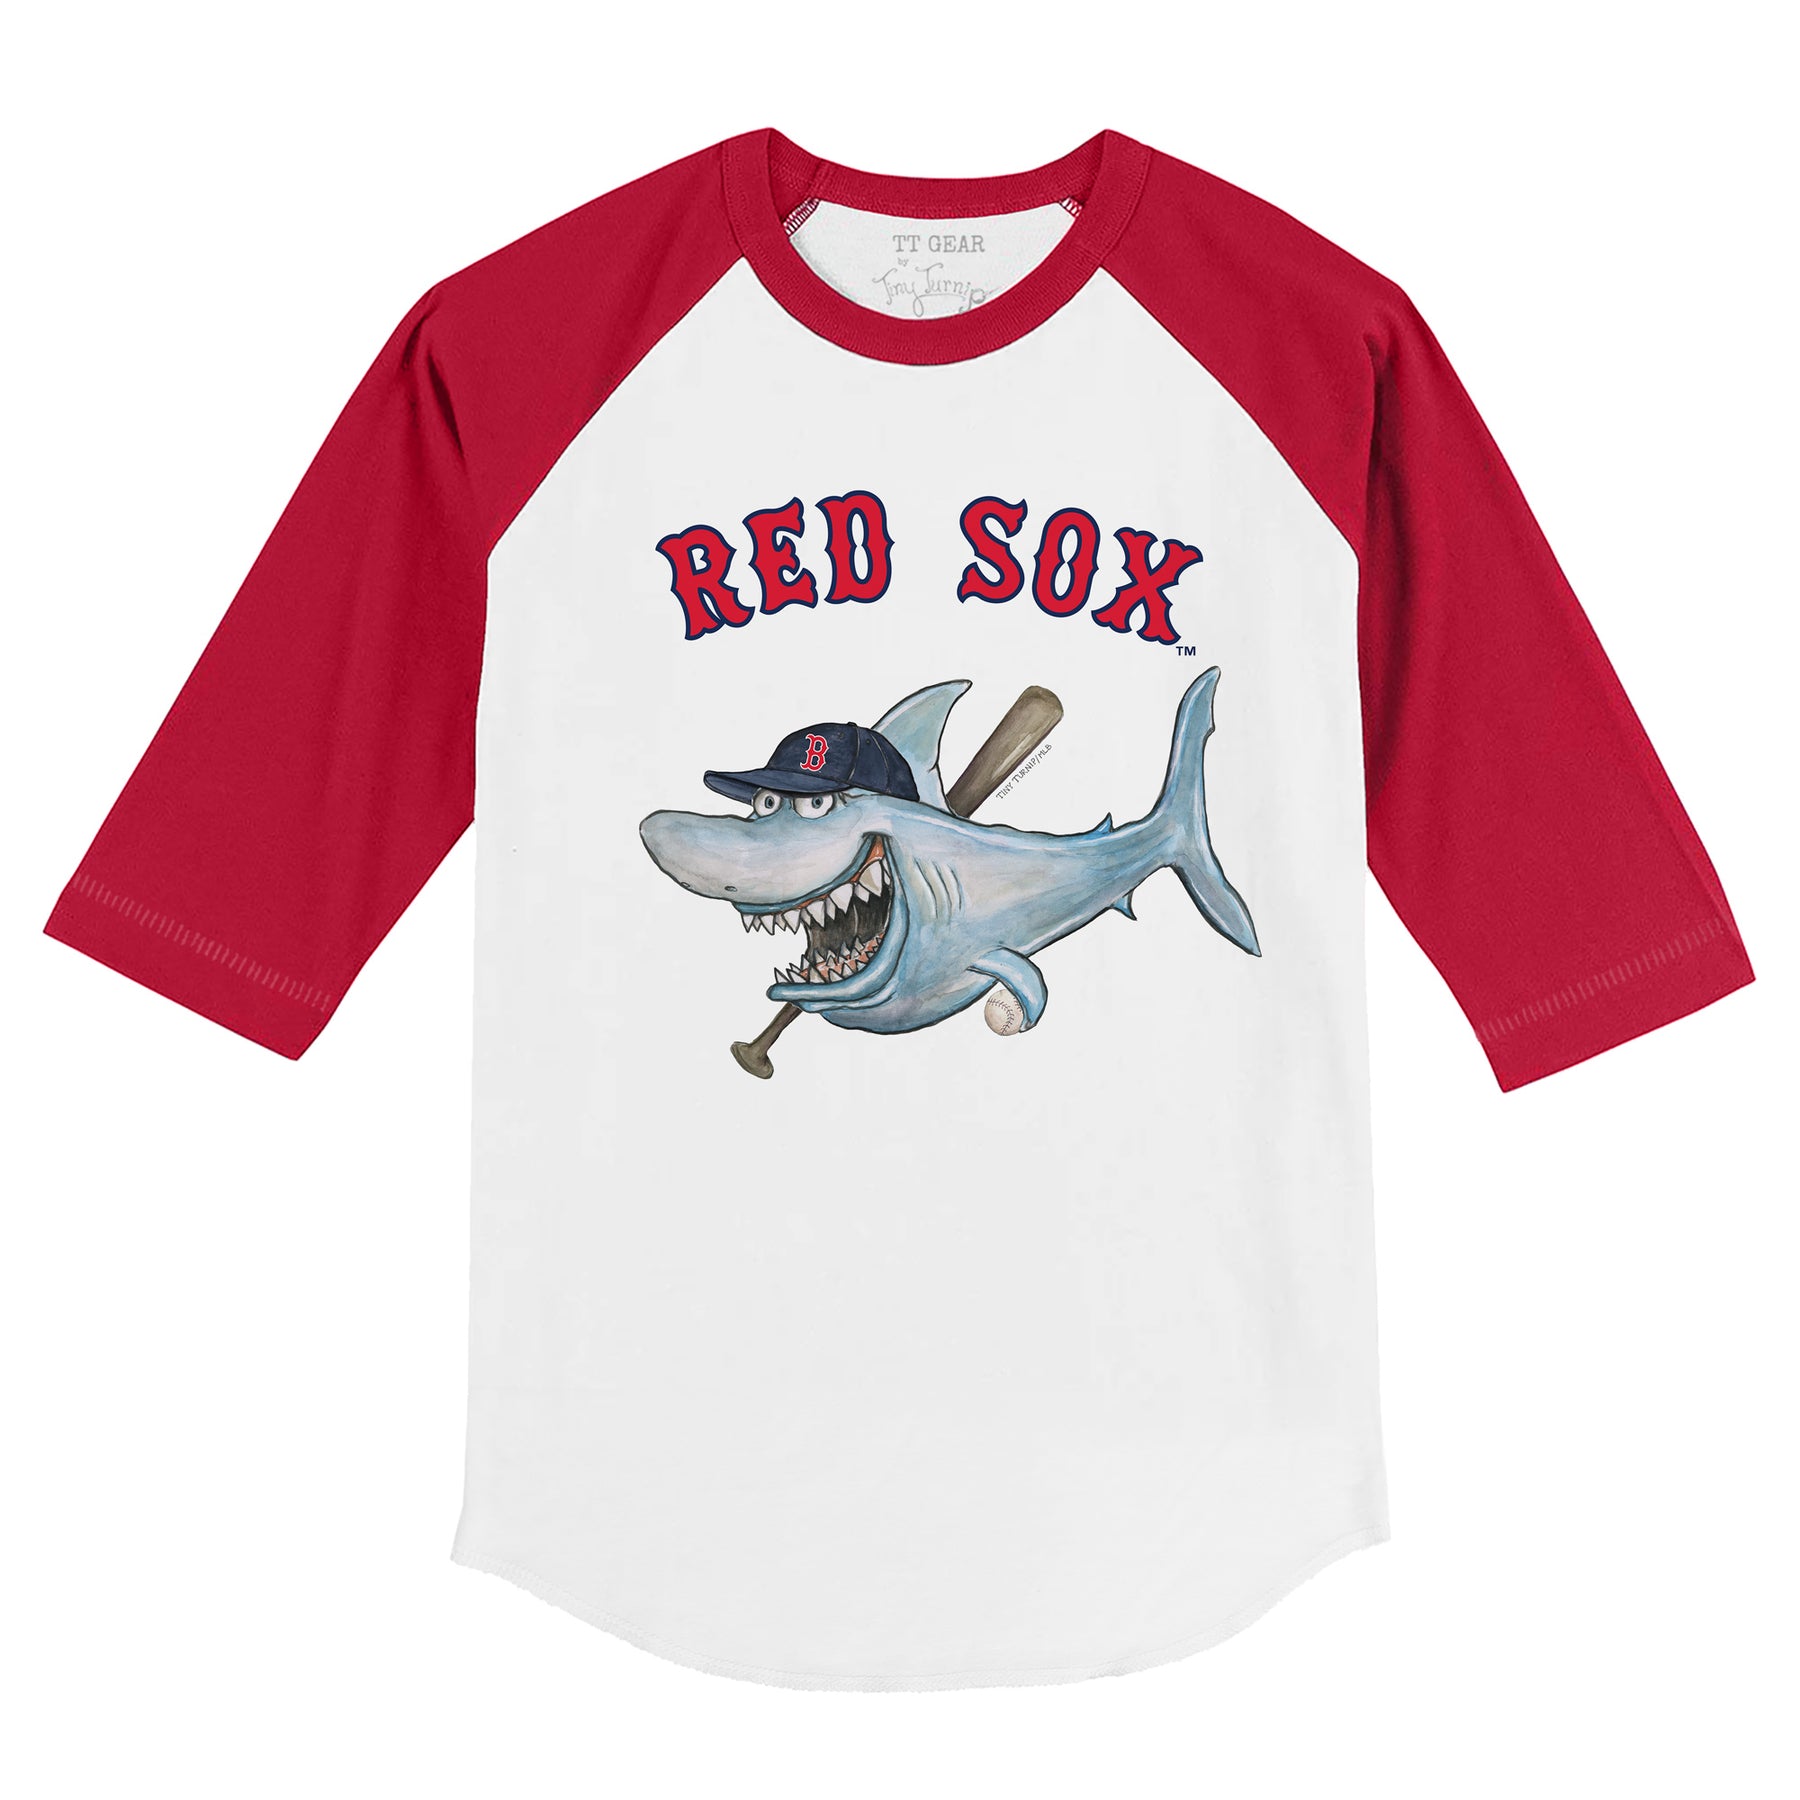 Boston Red Sox White/Red 3/4 Sleeve Shirt